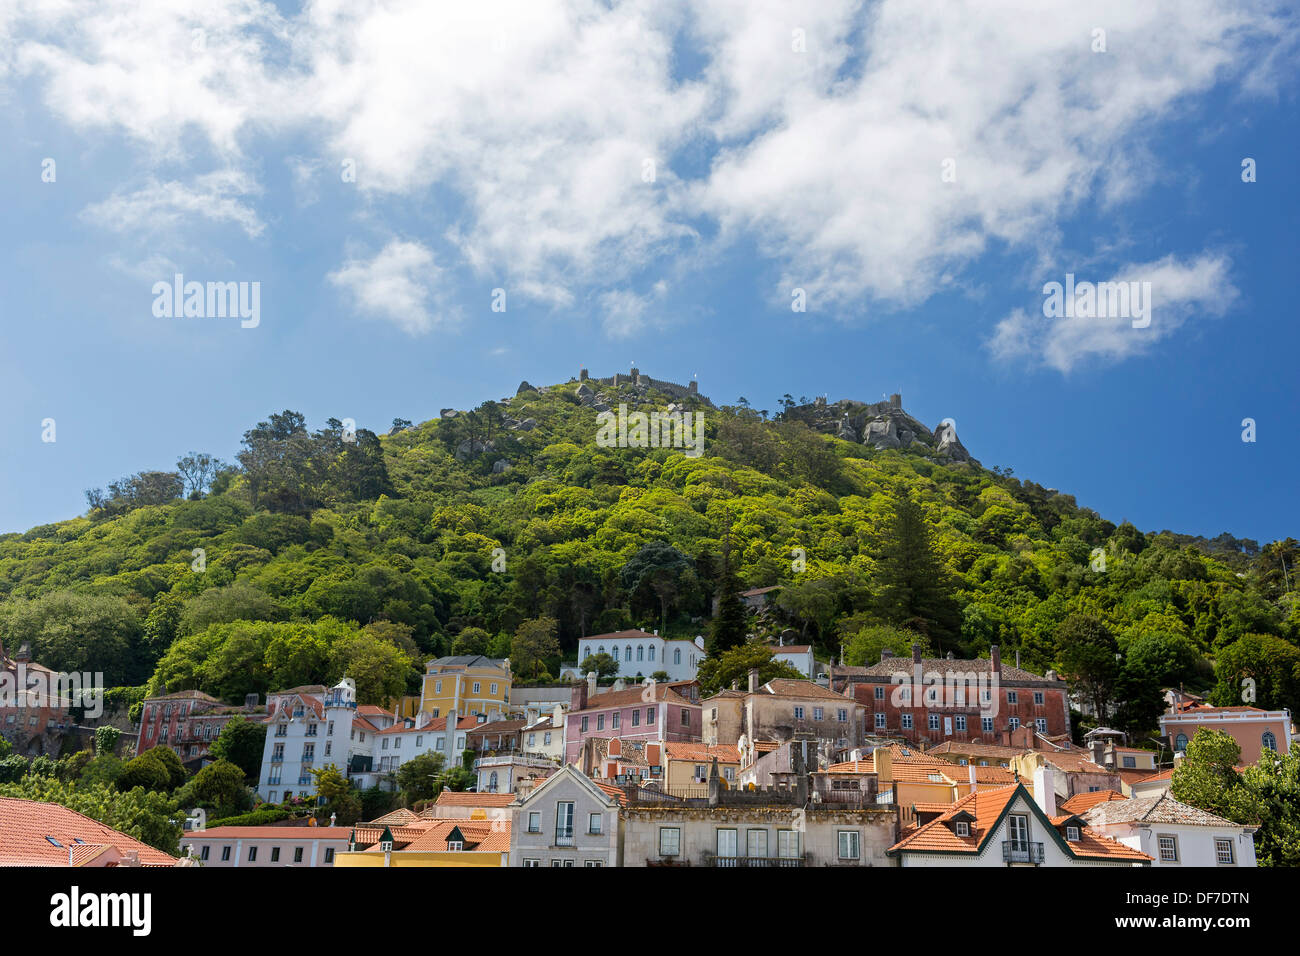 Castelo dos Mouros, Castle of the Moors, Moorish fortress, above the town of Sintra, Sintra, Lisbon District, Portugal Stock Photo